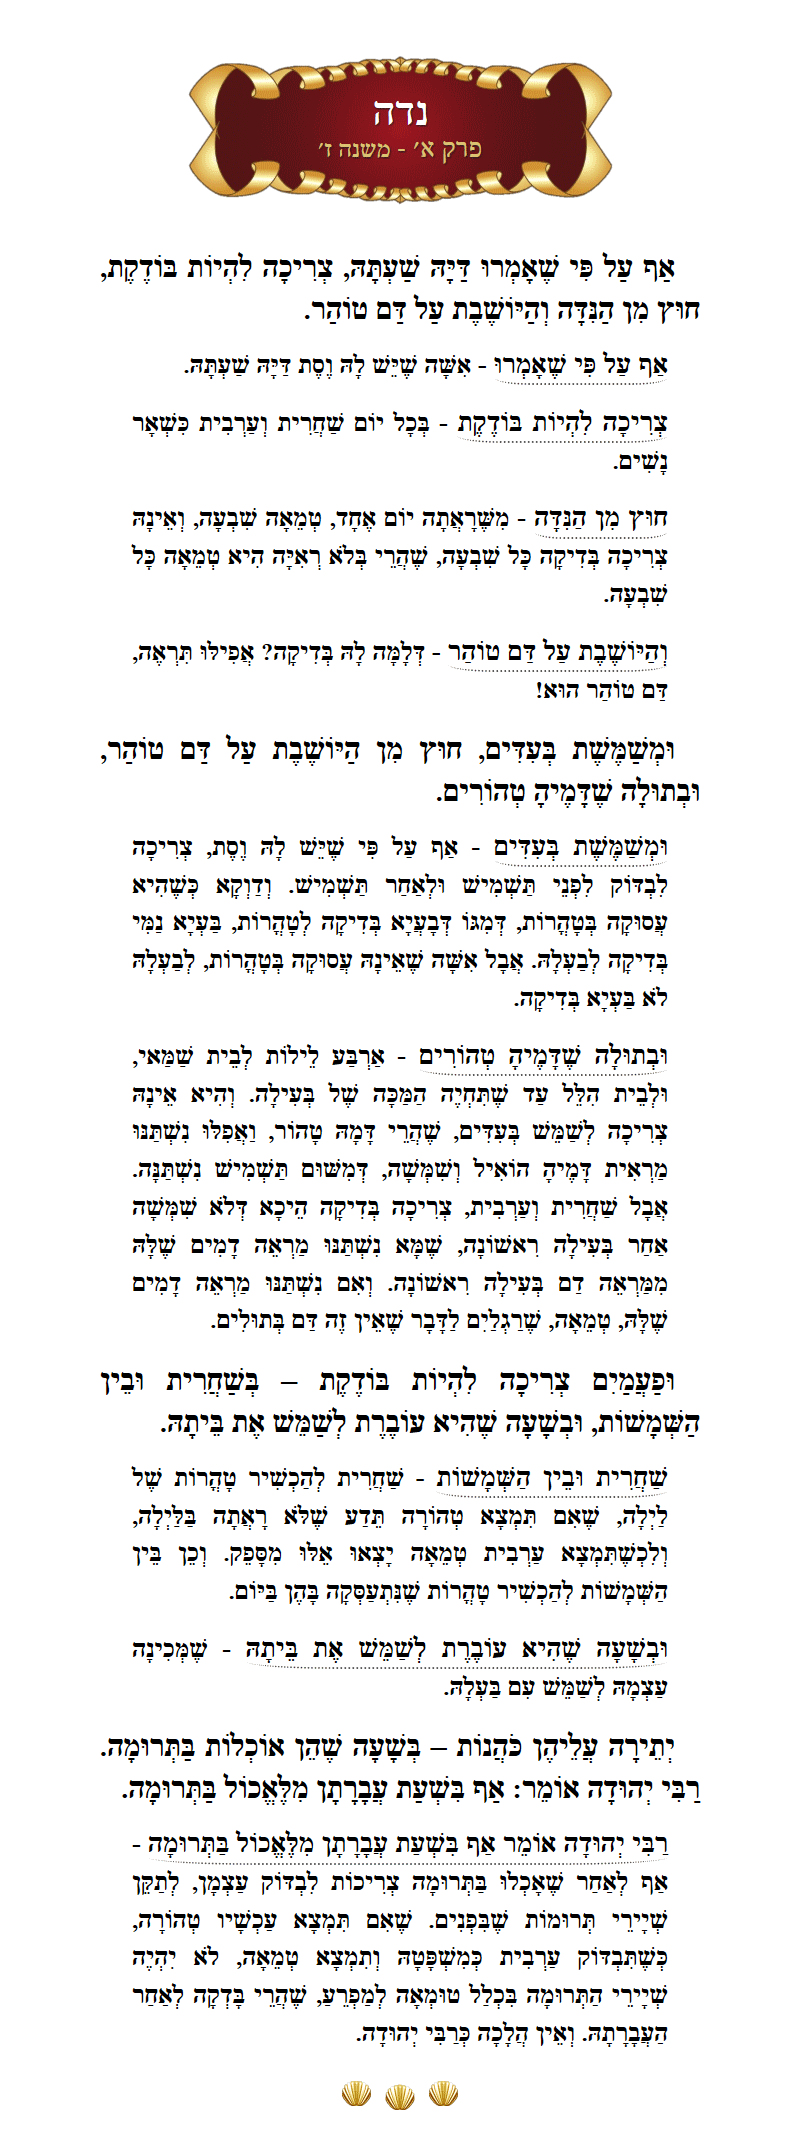 Masechta Niddah Chapter 1 Mishnah 7 with commentary